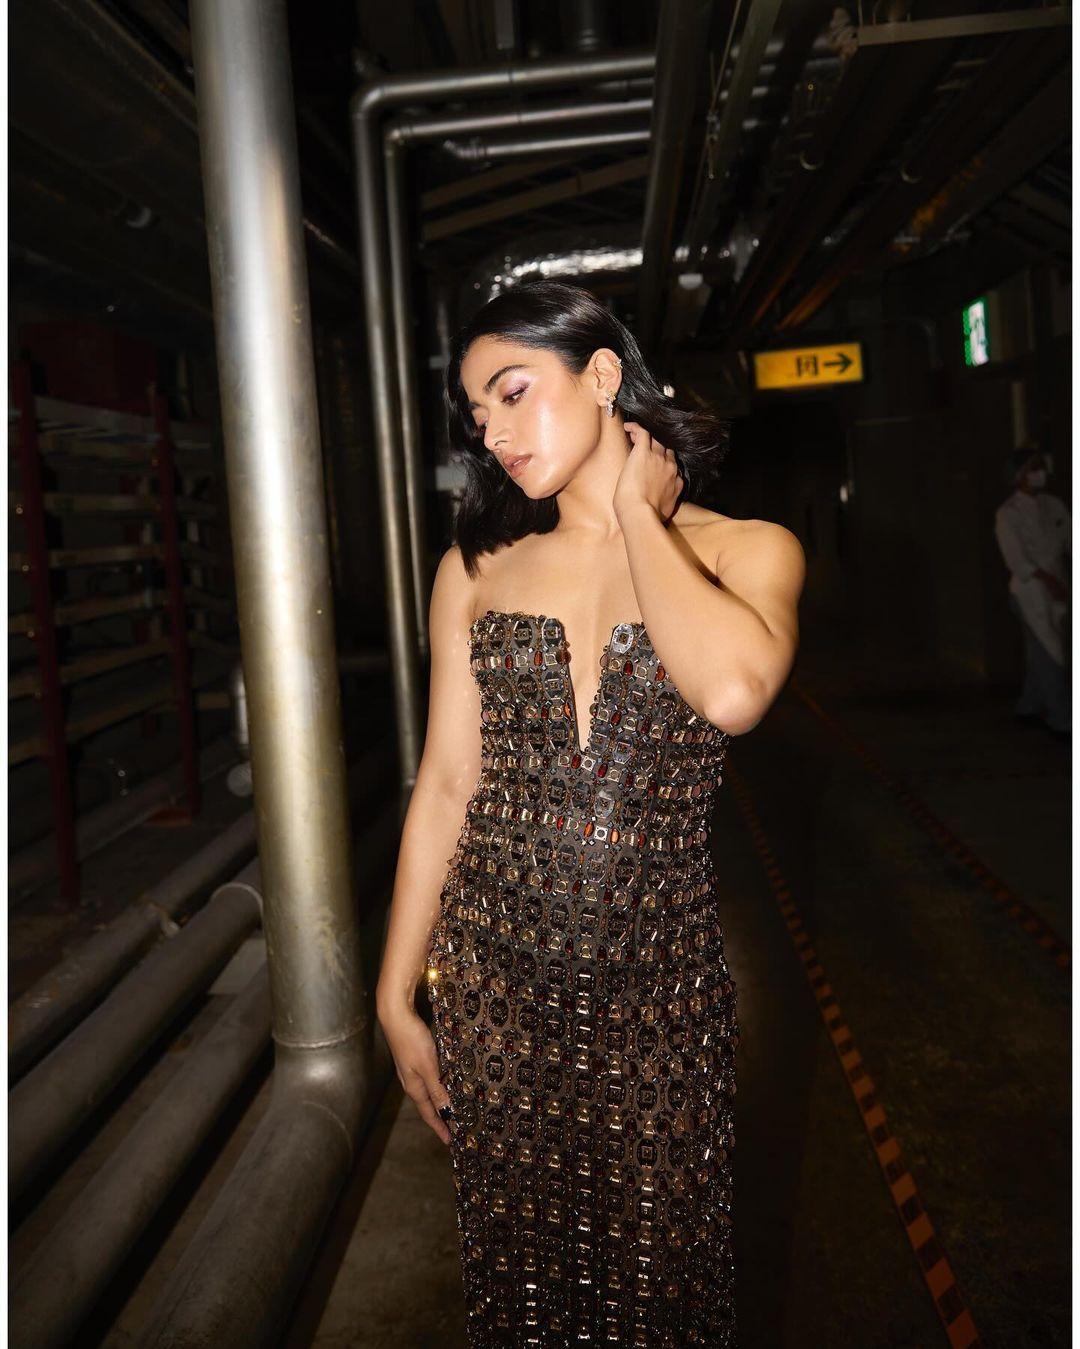 The queen never disappoints us. In this look, Rashmika aced it with a stunning metallic sequin strapless gown, and we can't get over it